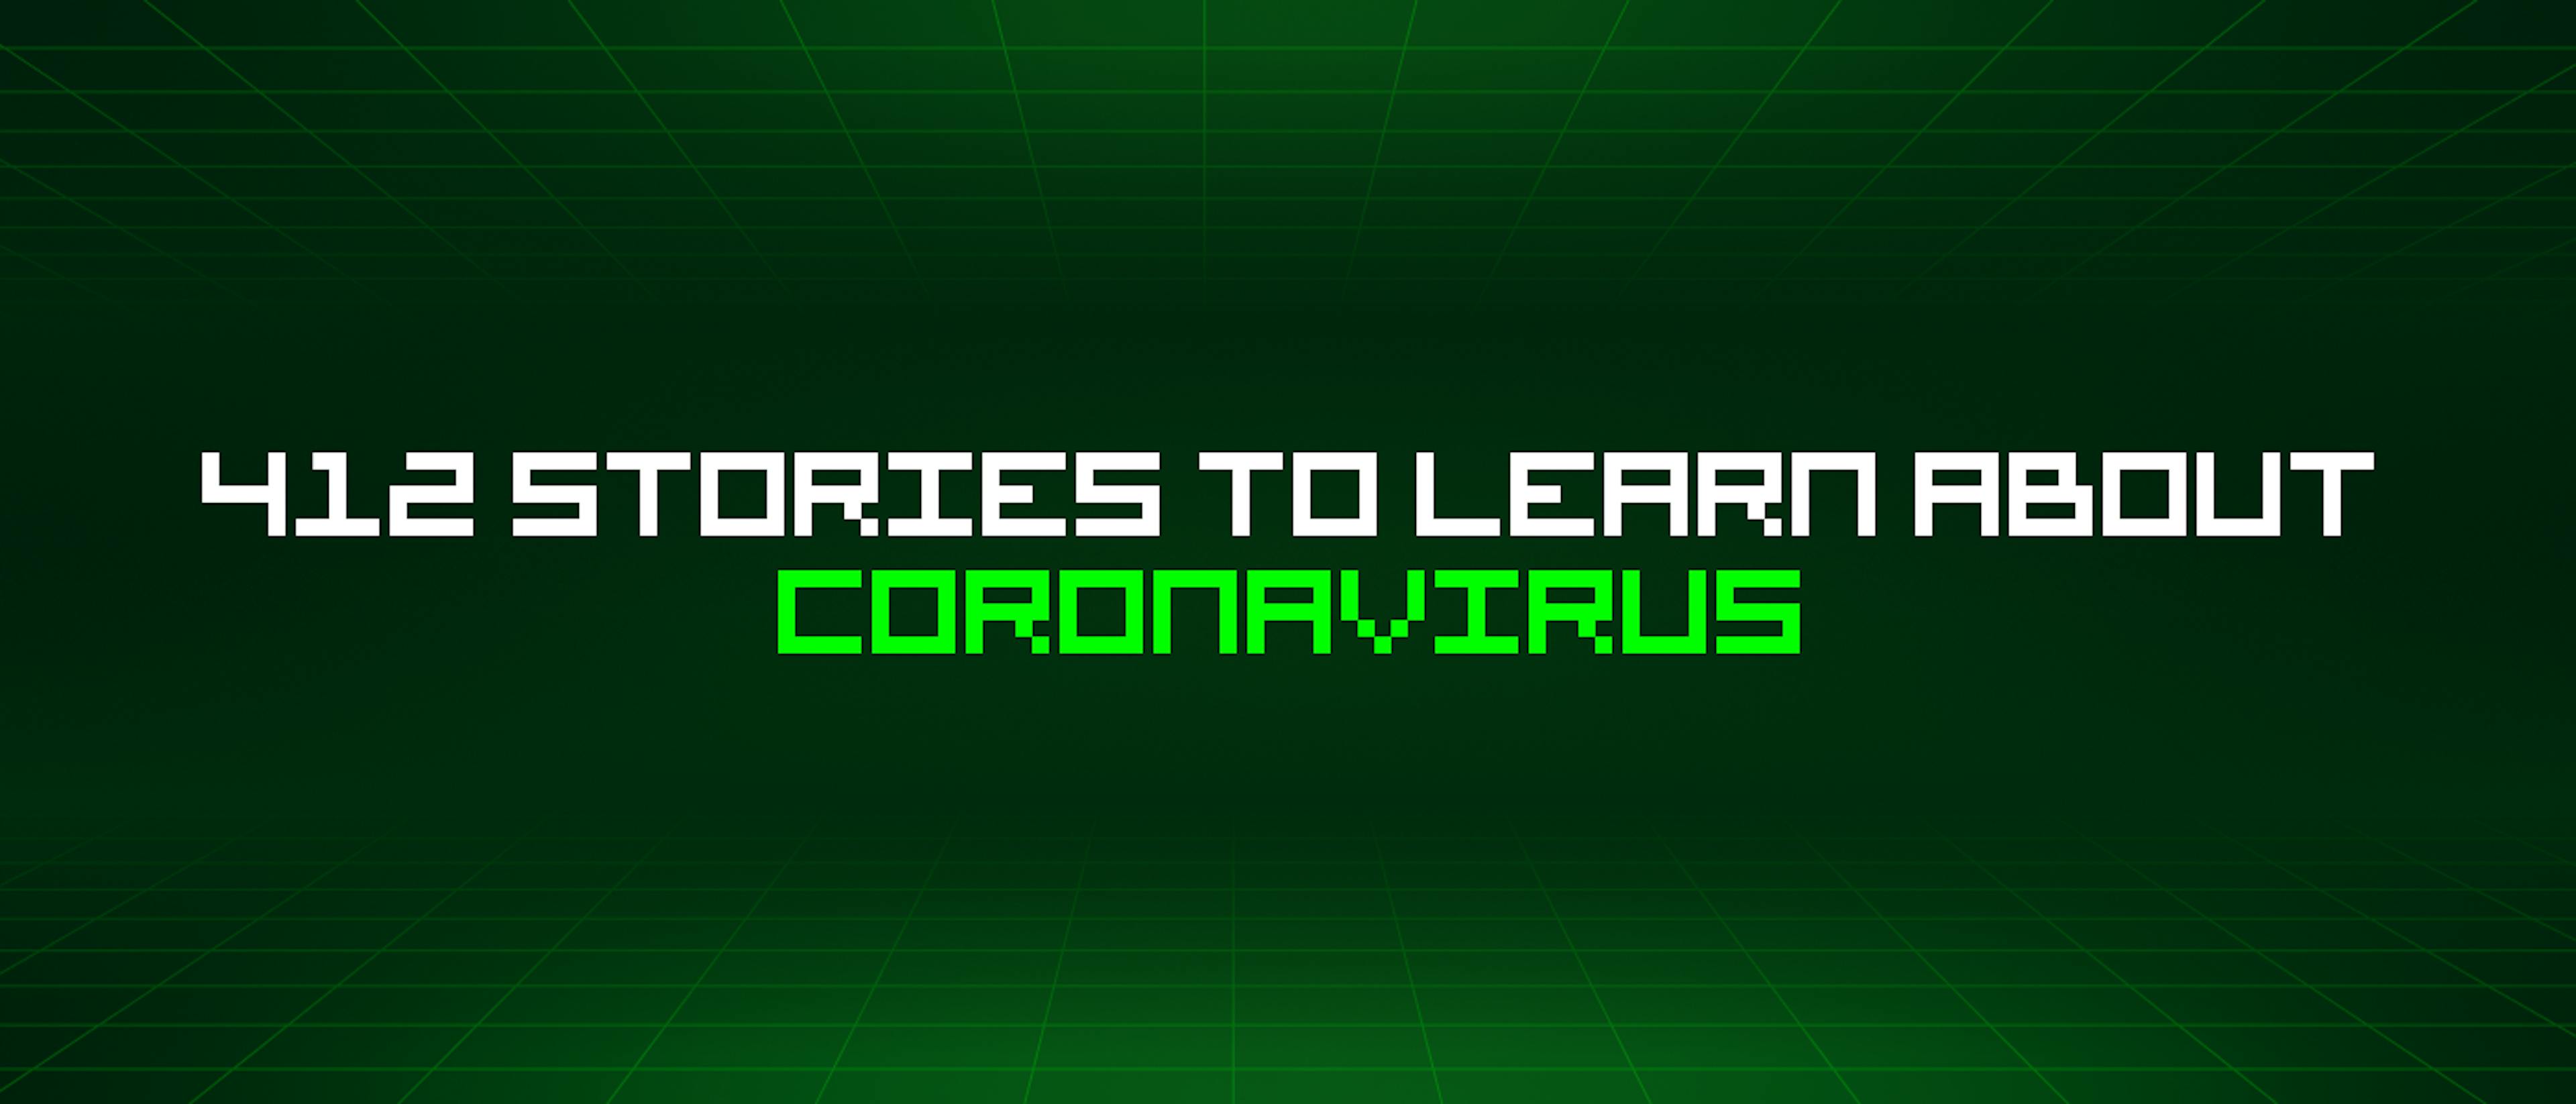 featured image - 412 Stories To Learn About Coronavirus